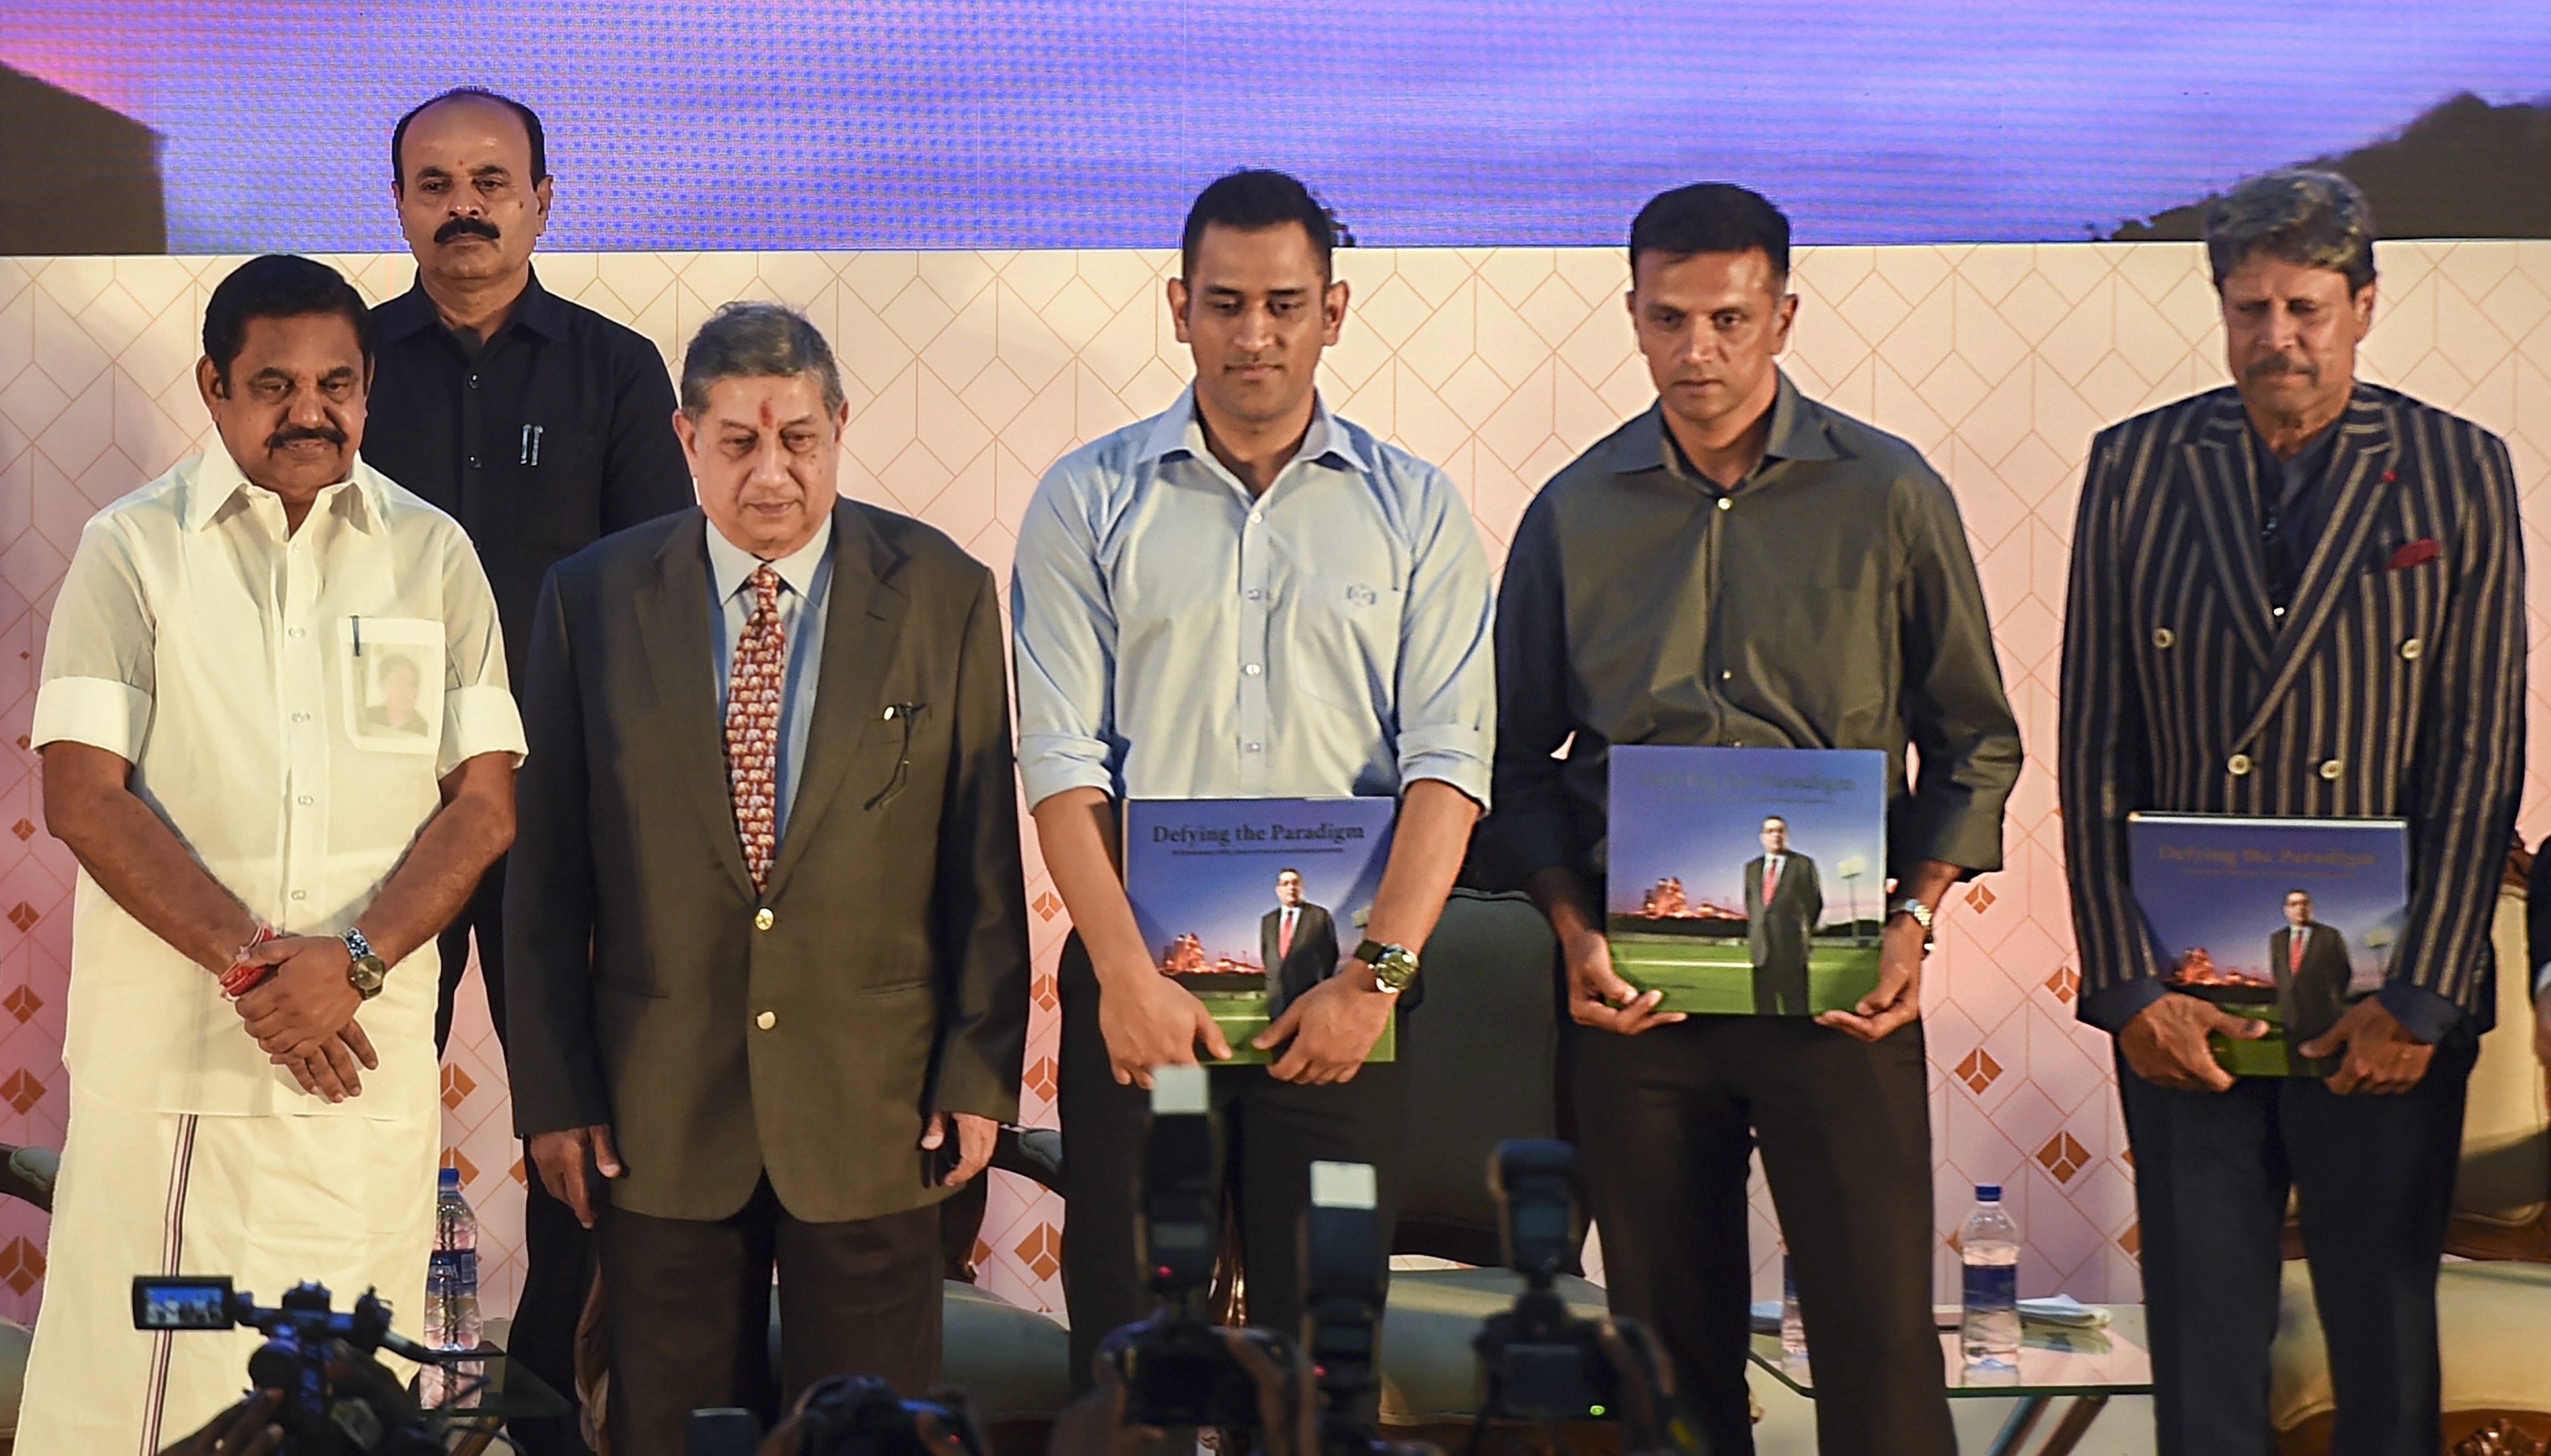 Tamil Nadu Chief Minister K Palaniswami, India Cements Ltd MD N Srinivasan, cricketers MS Dhoni, Rahul dravid, Kapil Dev during the launch of a coffee table book on the journey of India Cements Ltd. and 50 years of company's association with Srinivasan, in Chennai - PTI